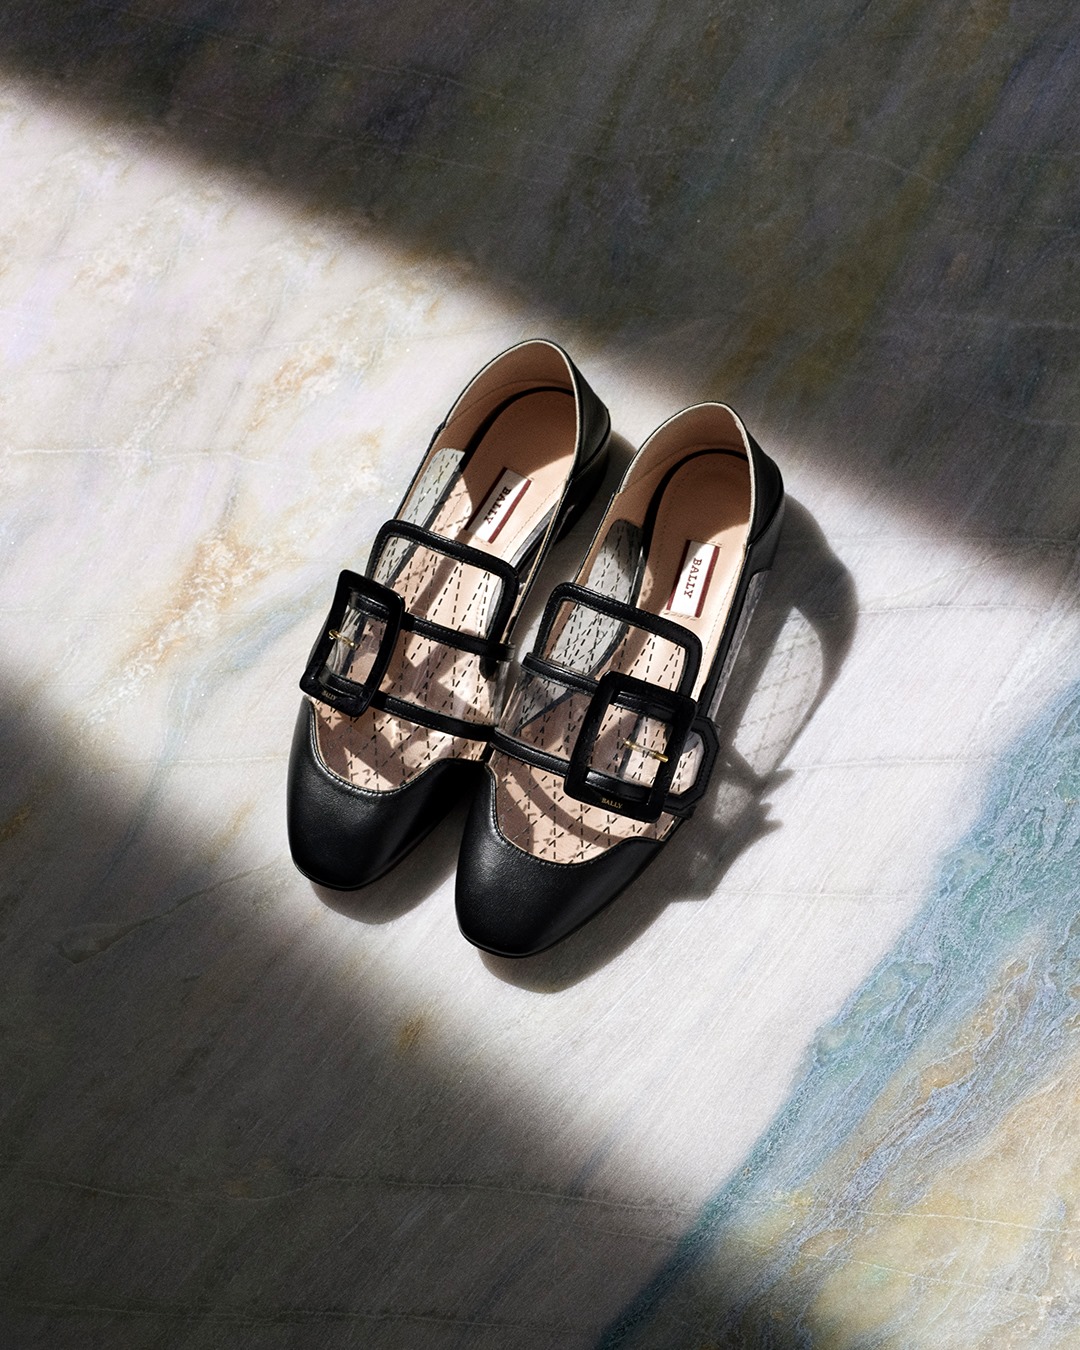 See through. A playful take on the classic Bally Janelle flats.